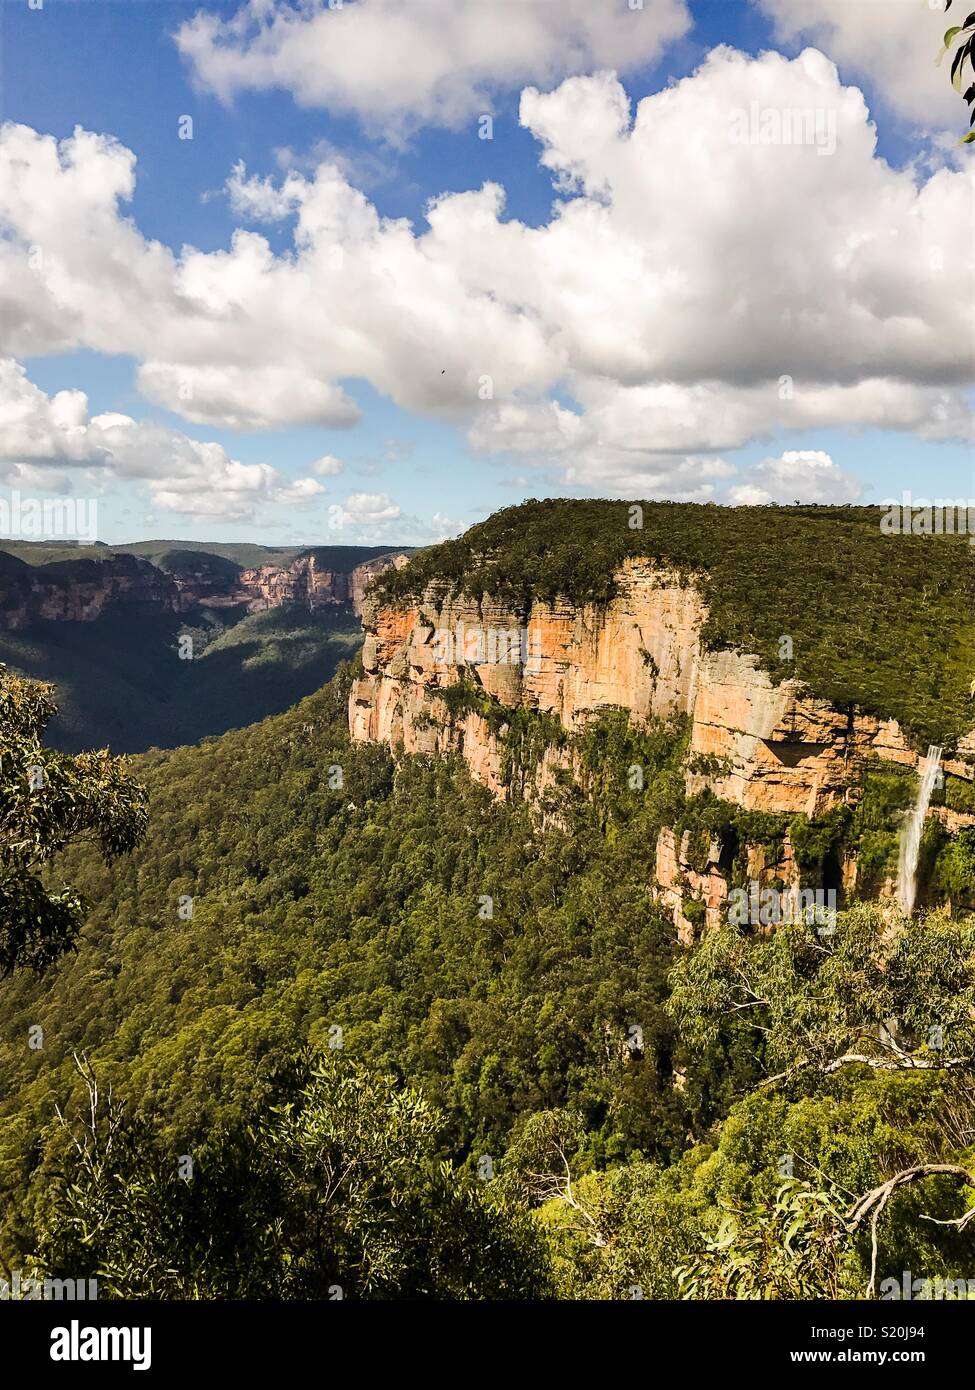 Breathtaking scenery in the Blue Mountains, Australia. The majesty of nature  at its most beautiful Stock Photo - Alamy